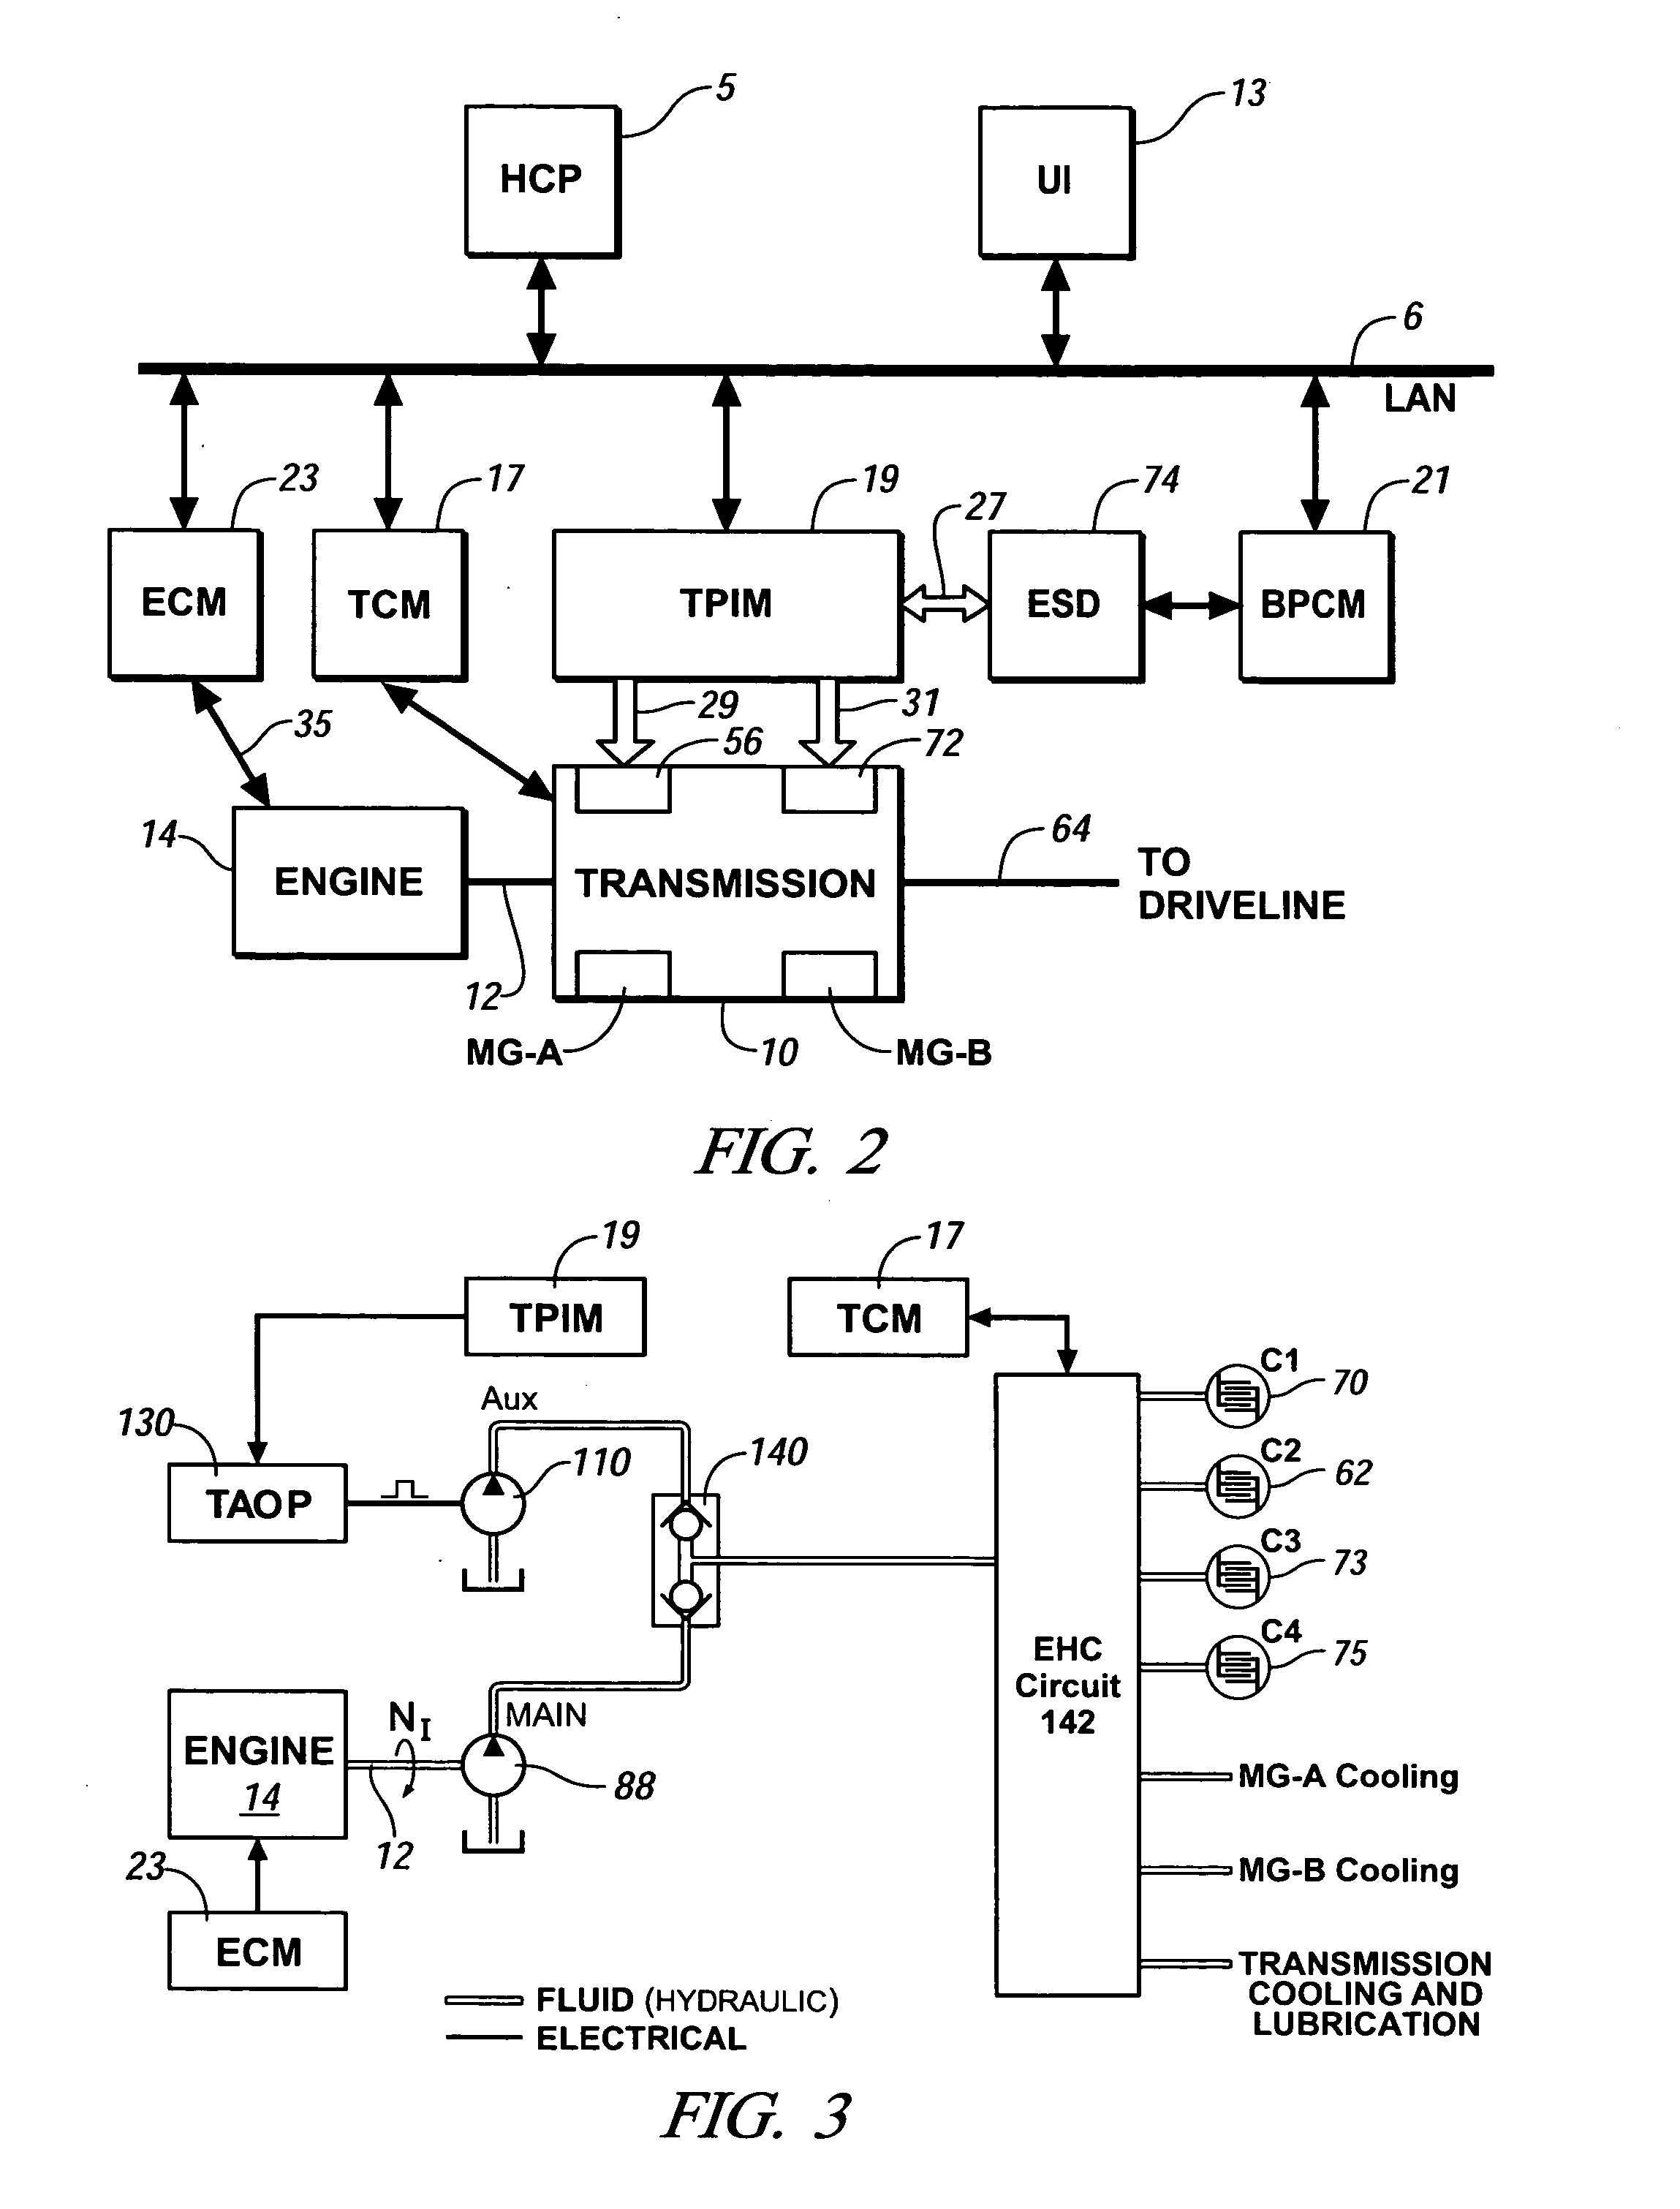 Method and apparatus to control hydraulic pressure in an electro-mechanical transmission